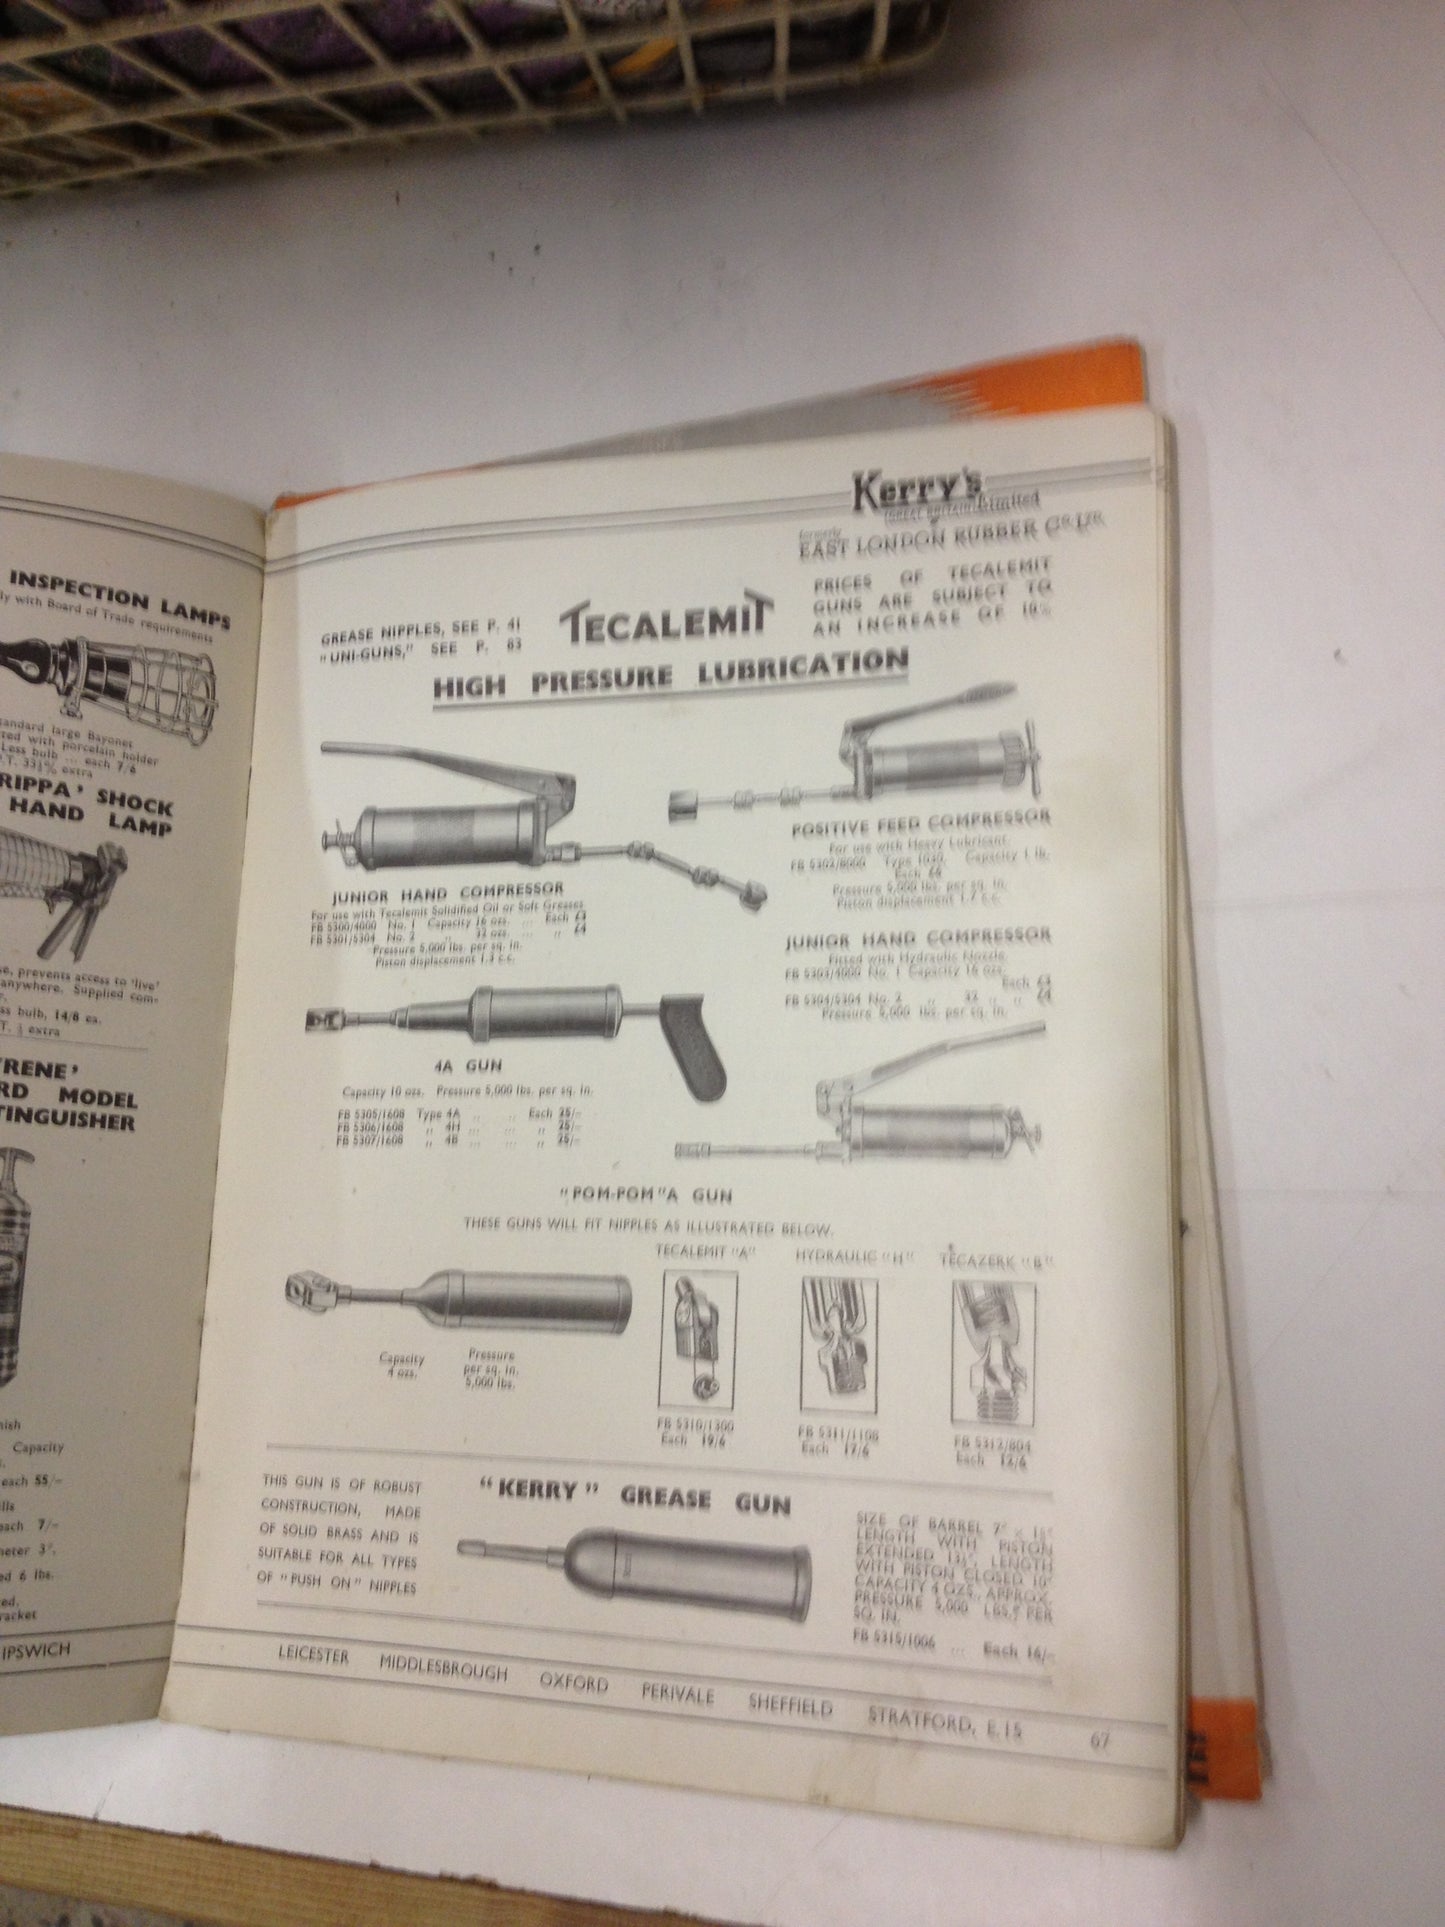 Book / Manual. Vintage Kerrys Ltd Tractor Spares Fitting & Tools